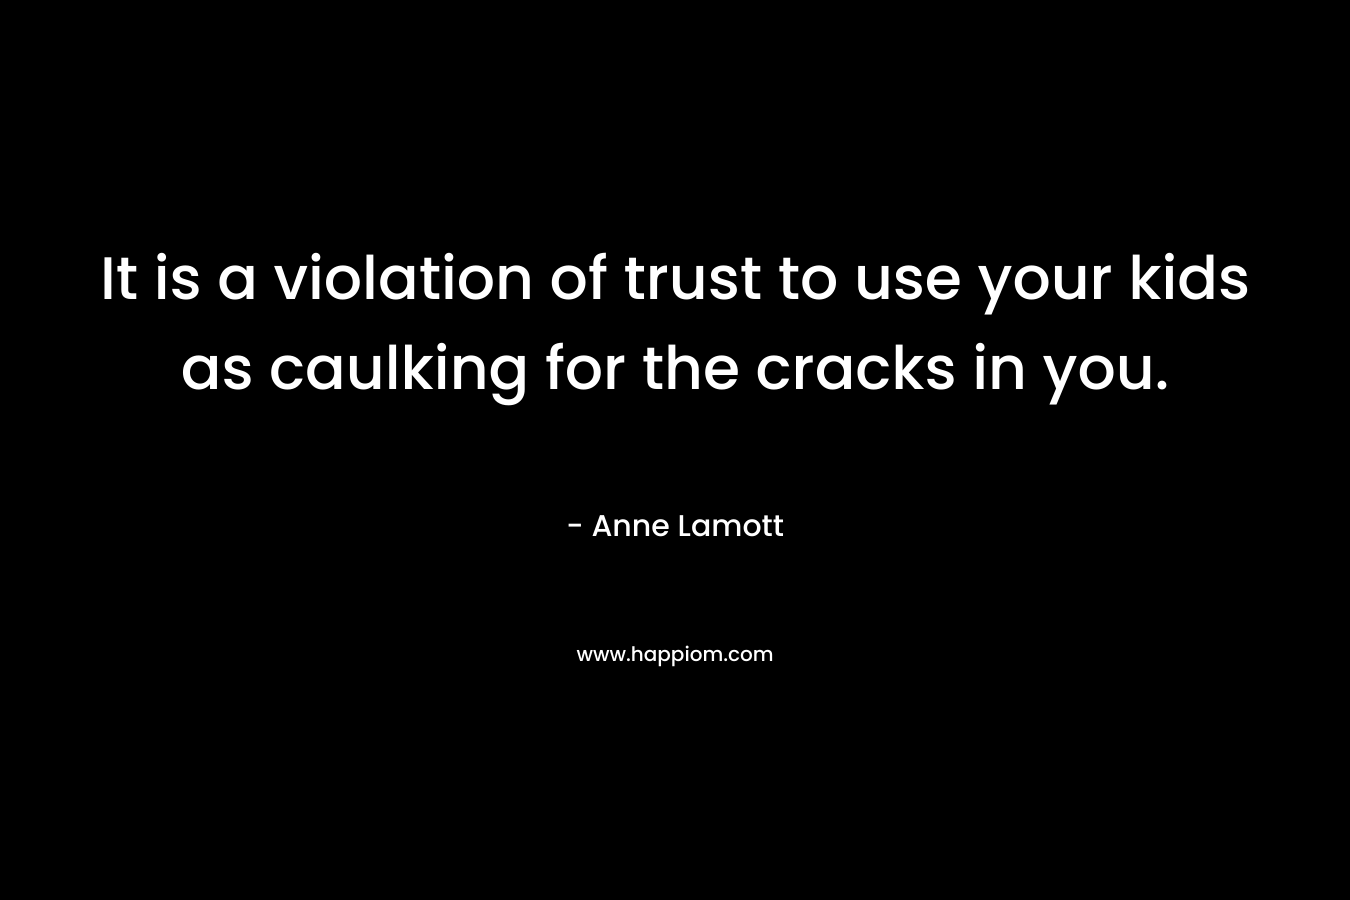 It is a violation of trust to use your kids as caulking for the cracks in you. – Anne Lamott